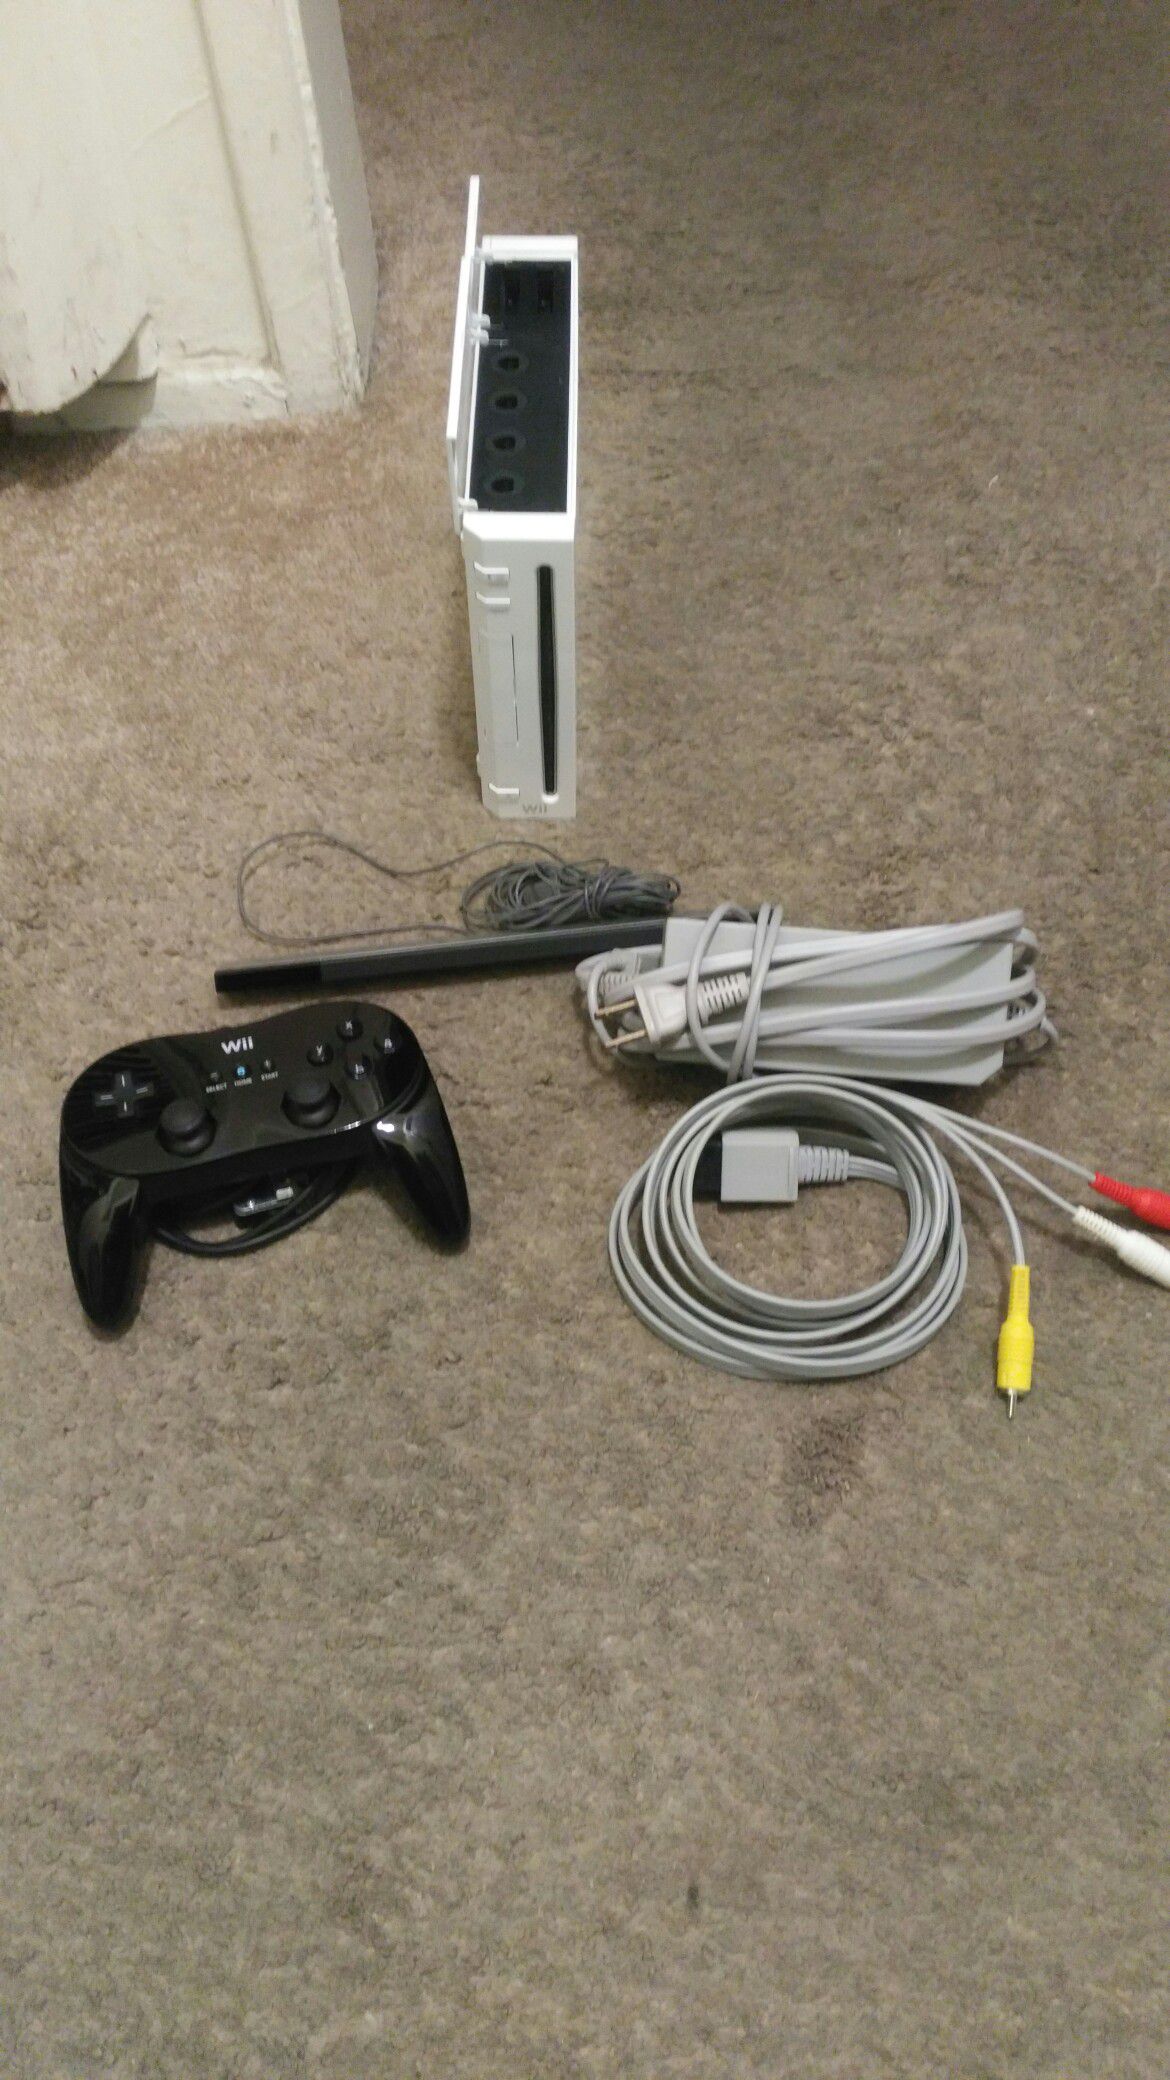 Nintendo Wii for sale everything works good